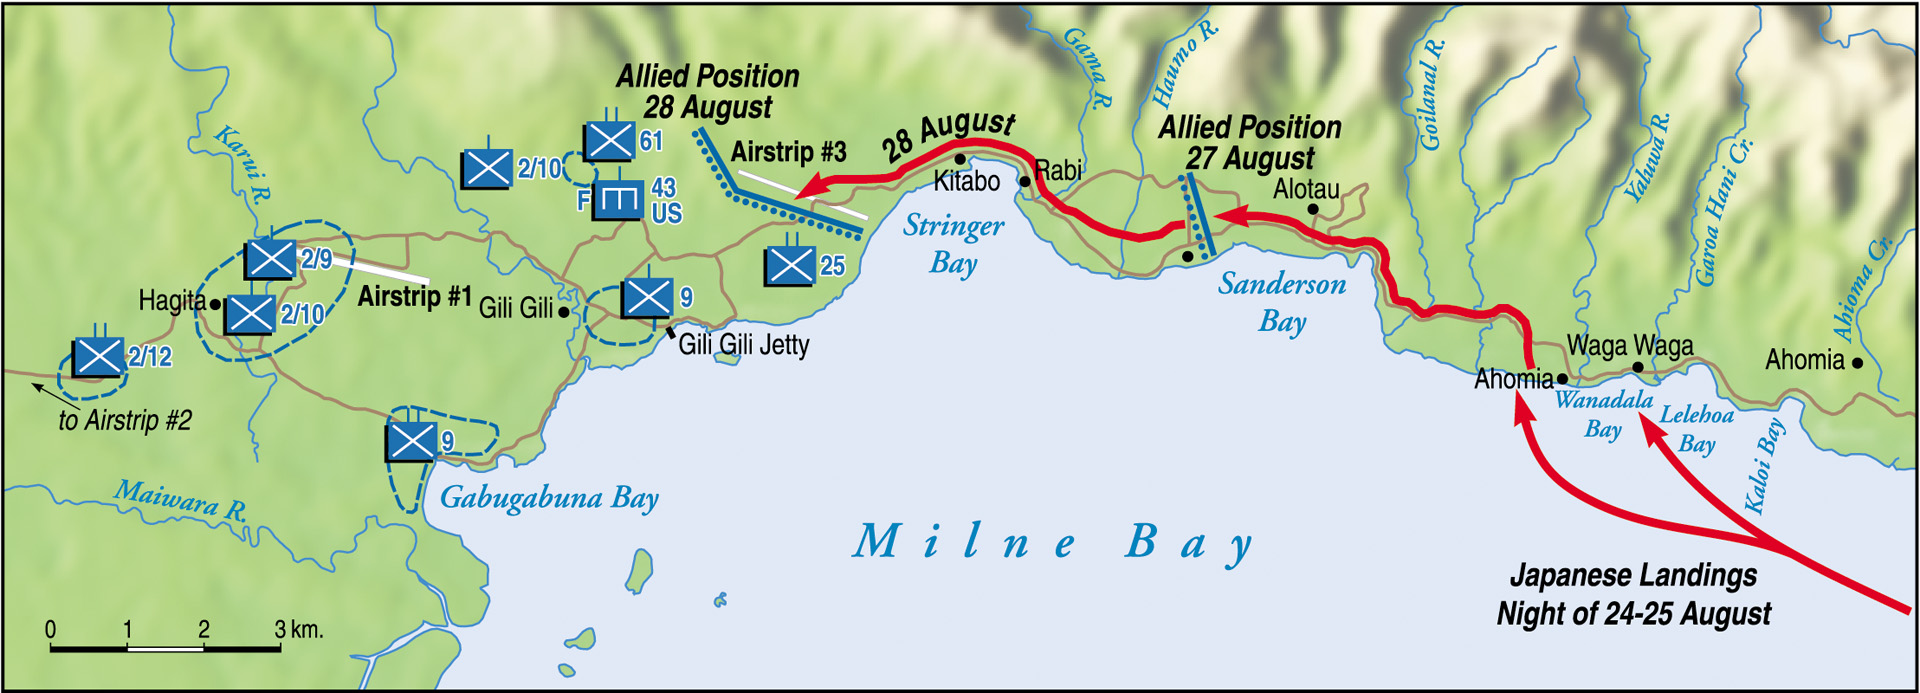 The Japanese offensive at Milne Bay began with an amphibious landing, followed by a march along the coast of New Guinea. Australian diggers and American troops combined to halt the operation, dealing the Japanese their first major setback in the campaign for control of the island.